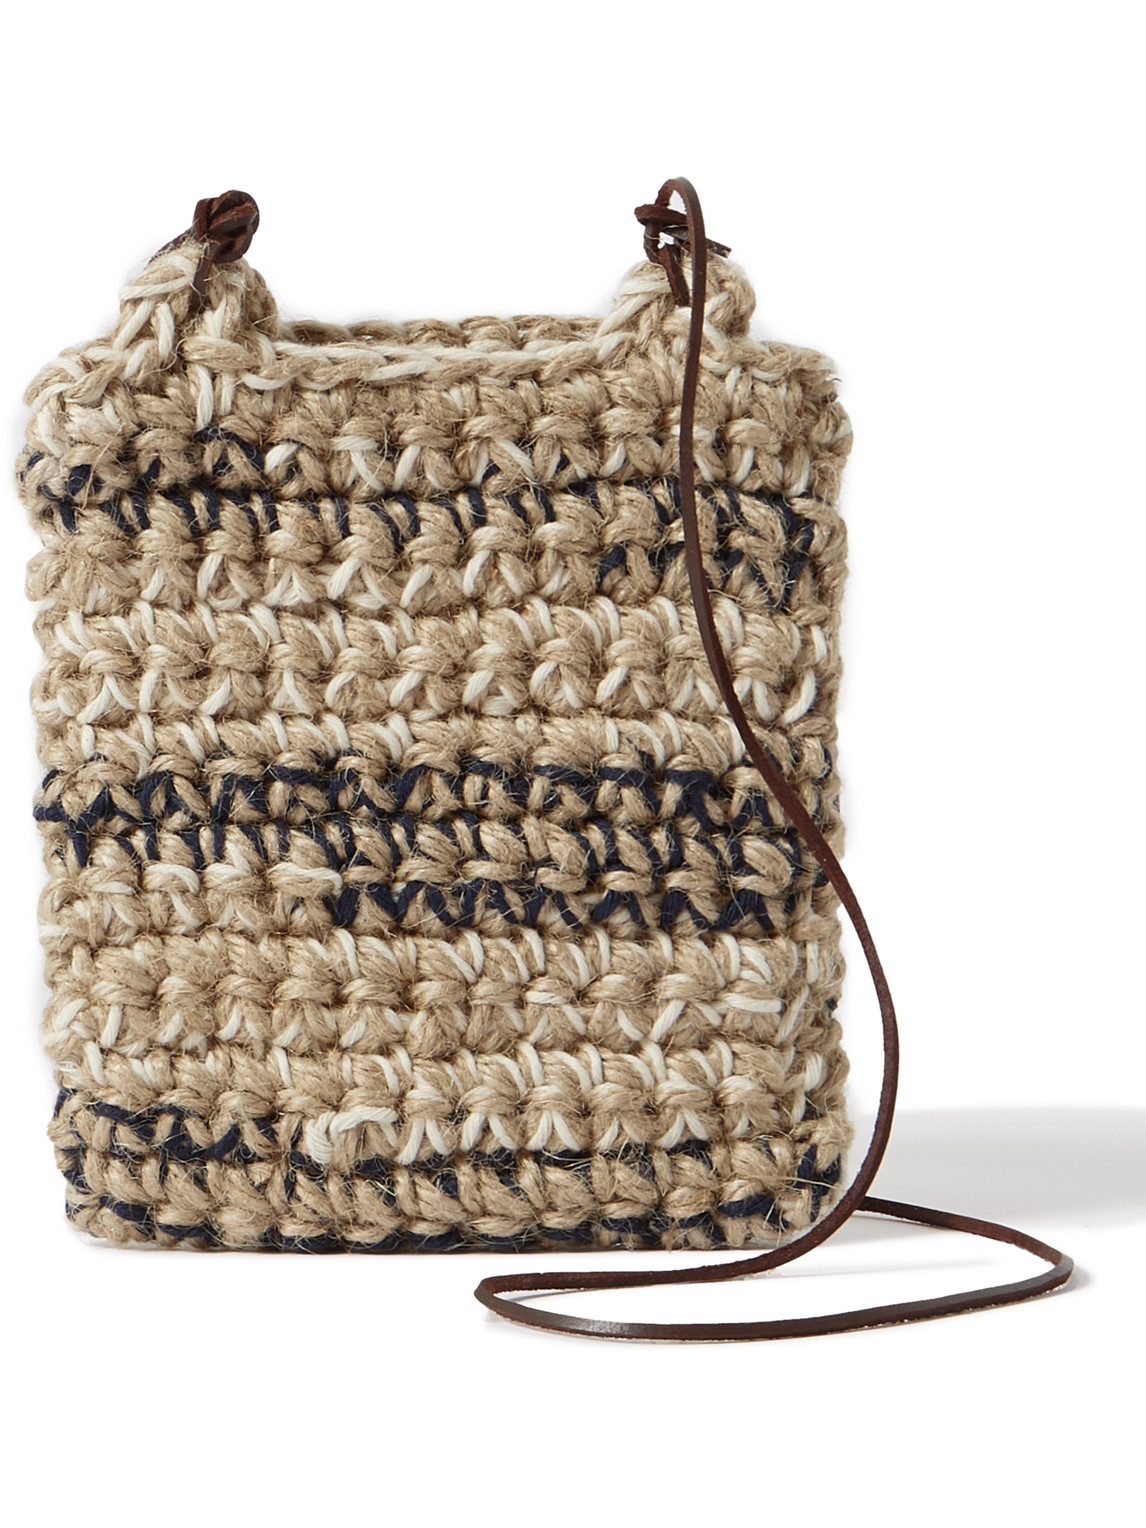 Nicholas Daley Crocheted Jute And Cotton-blend Pouch In Neutrals